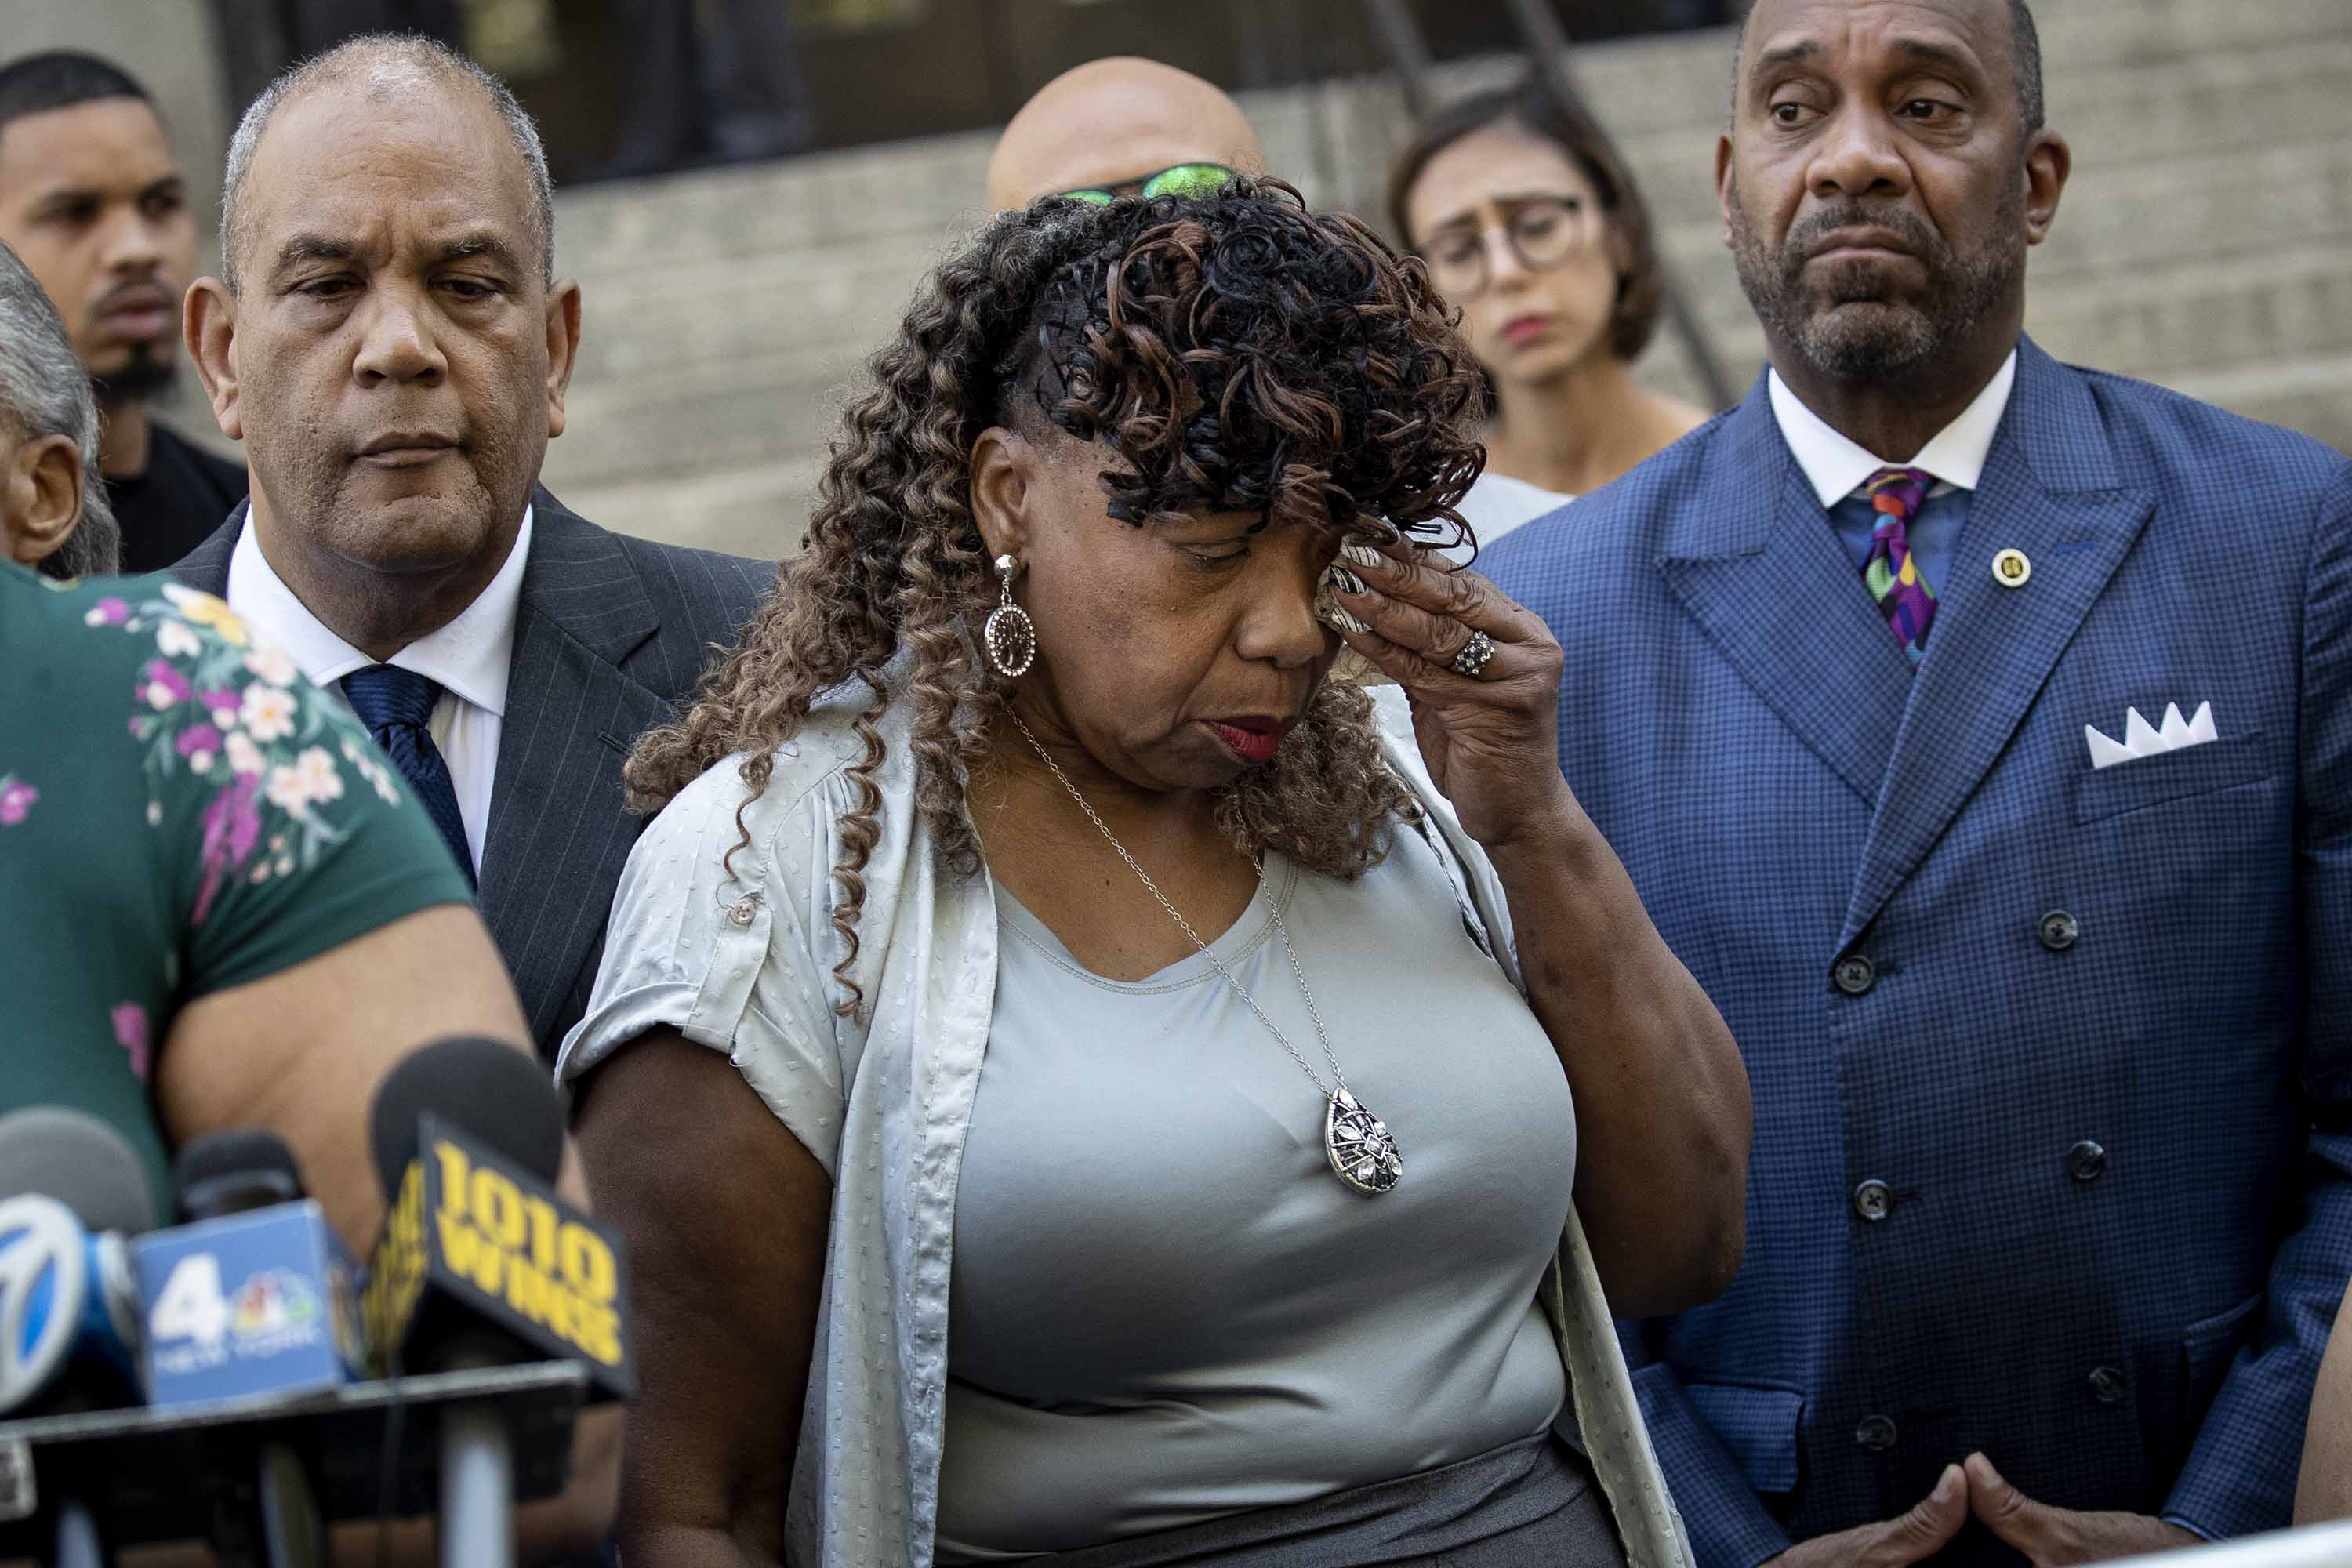 Garner: Prosecutors say they could not prove NYPD officer acted willfully in his death | CNN